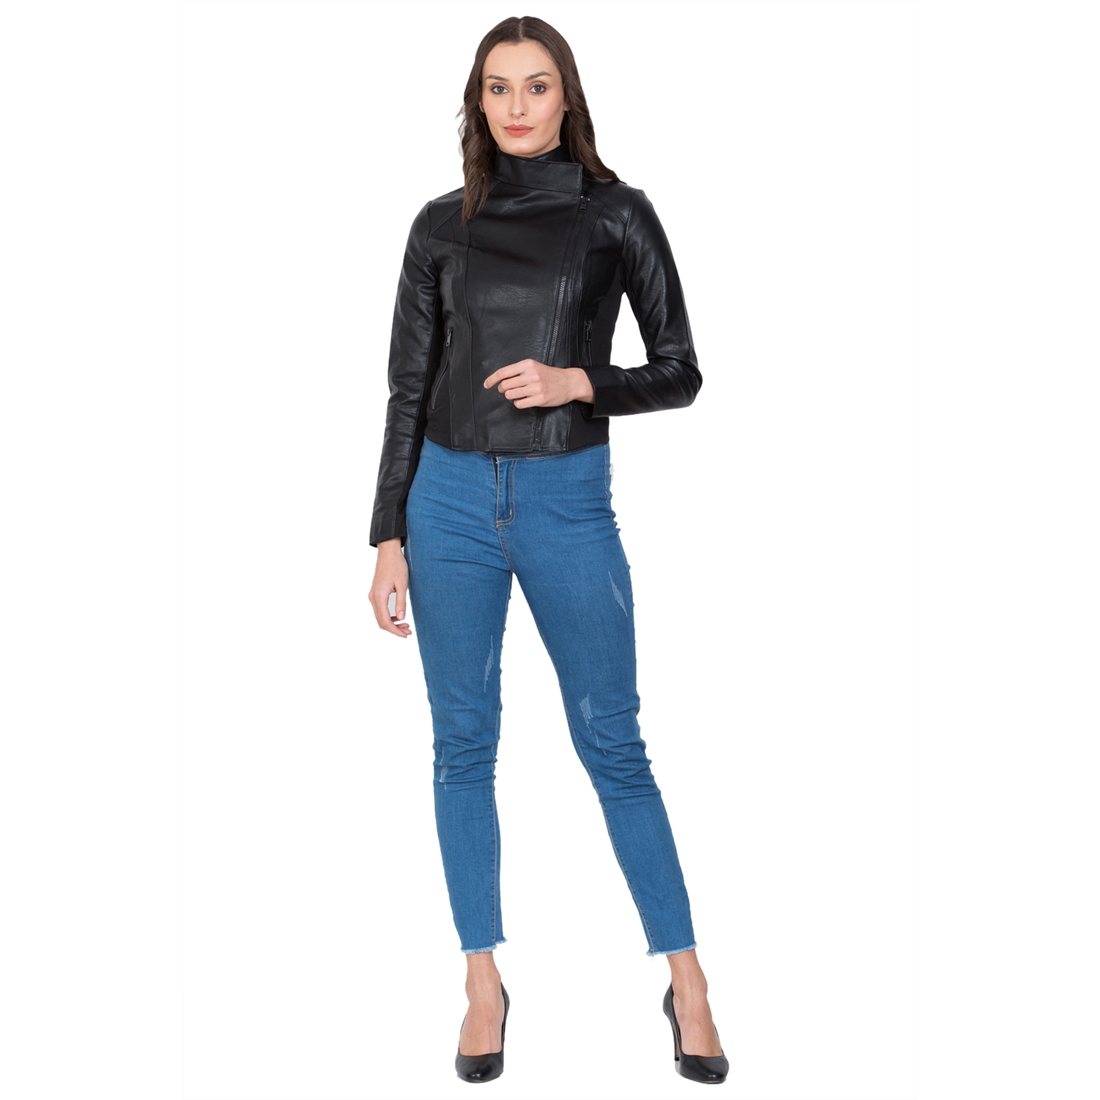 Justanned | JUSTANNED CARBON WOMEN LEATHER JACKET 1